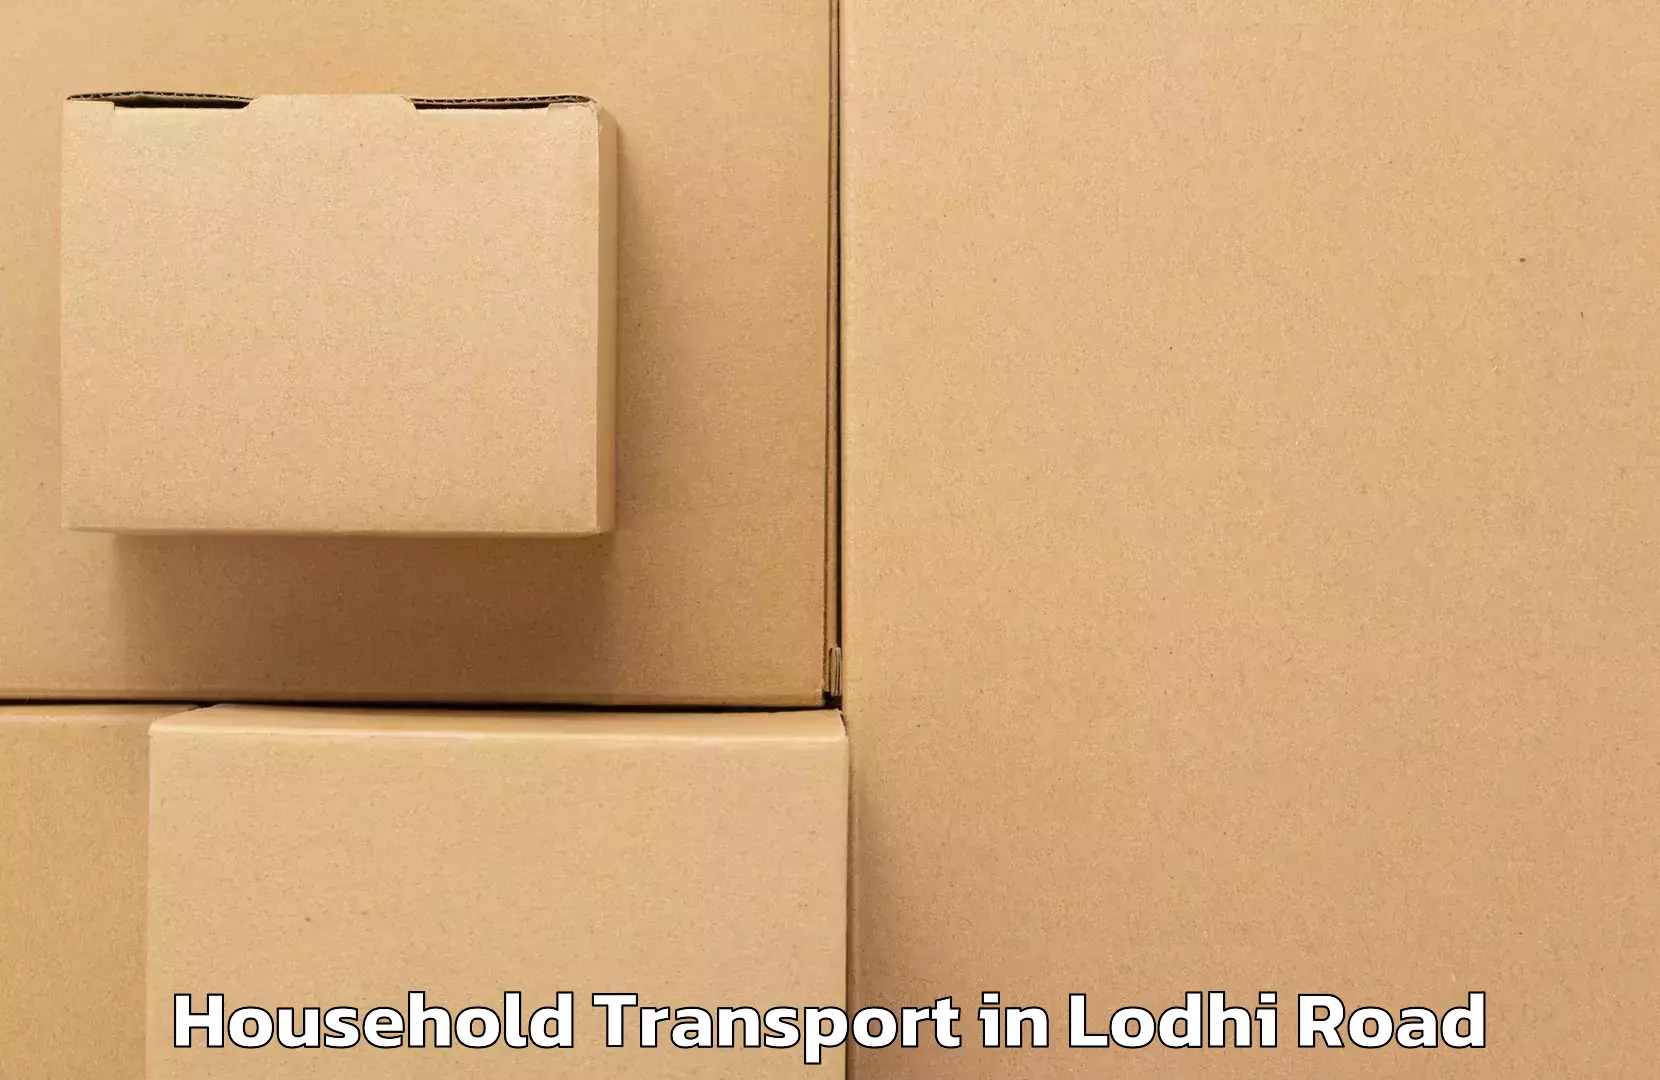 Household goods transport in Lodhi Road